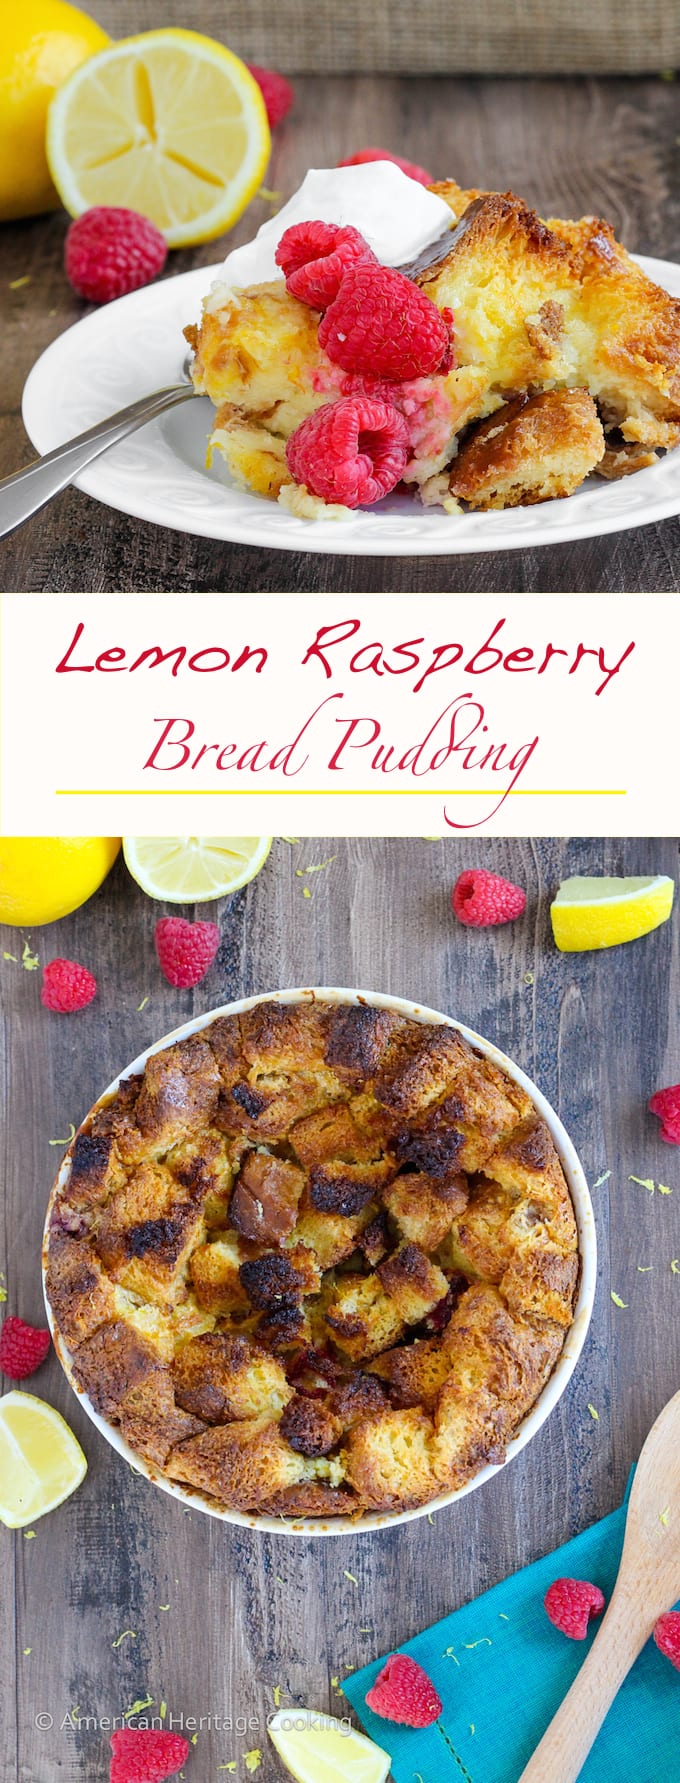 his Lemon Raspberry Bread Pudding with Lemon Brandy Sauce is the perfect light dessert for Spring! You will love the bright flavors! 